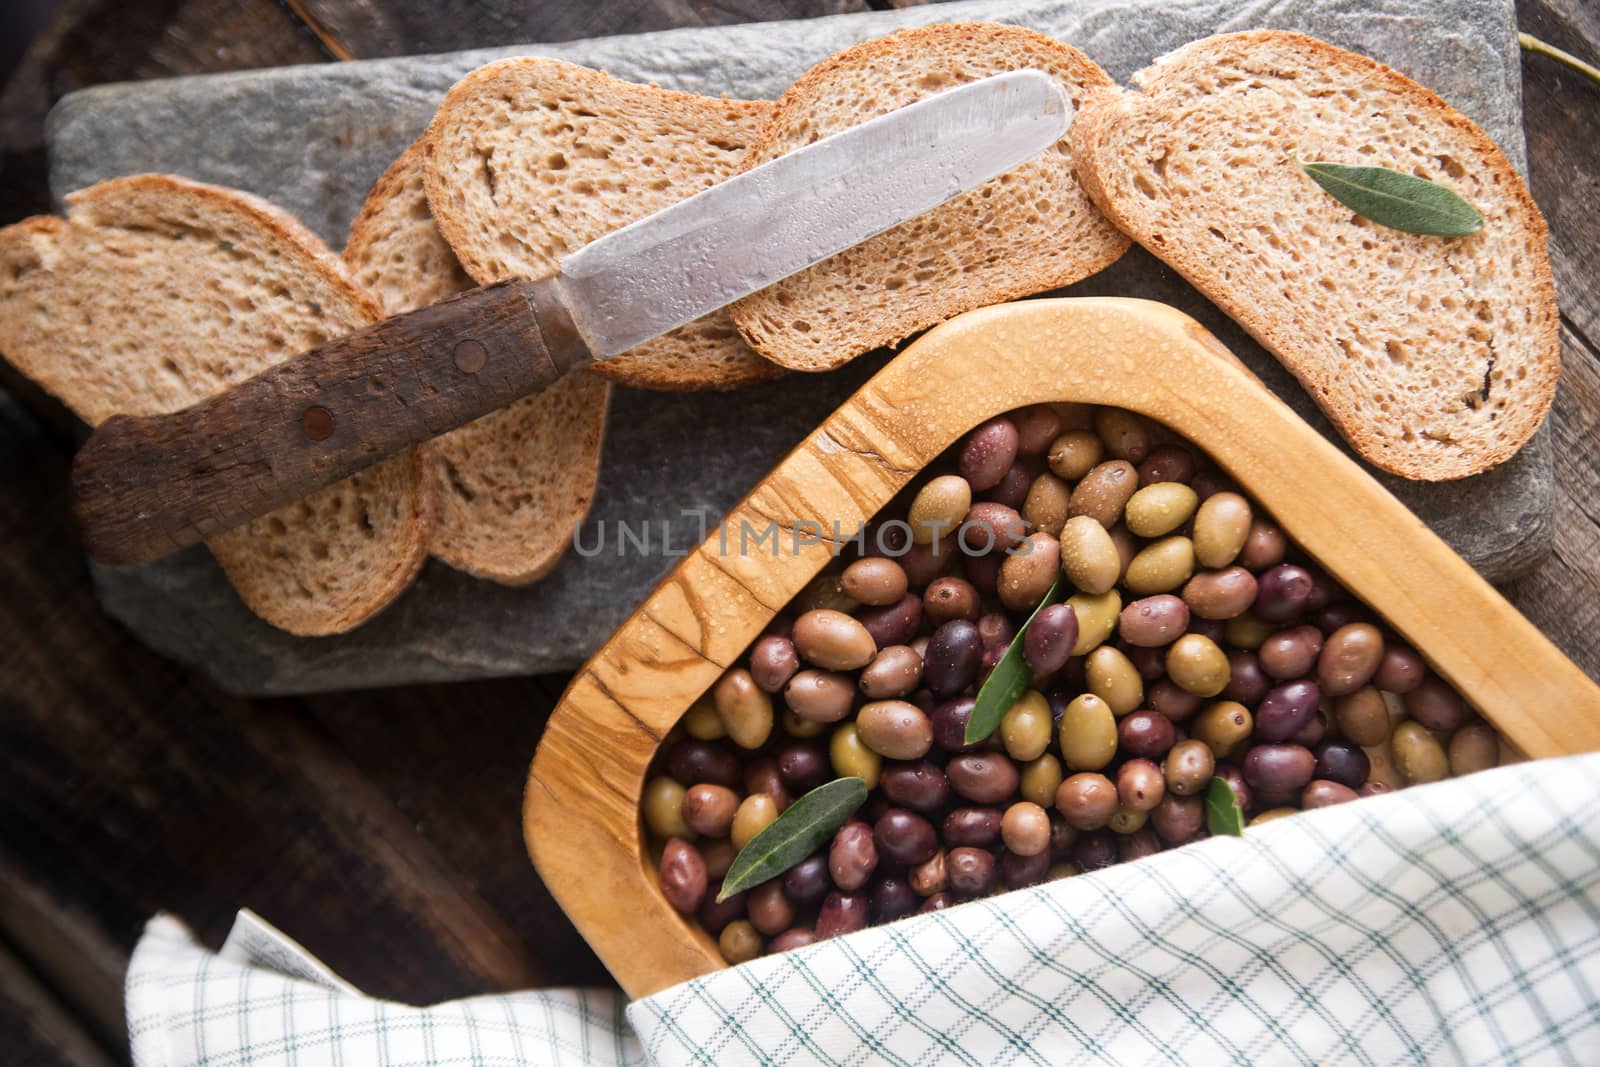 Aperitif made of bread with mixed olives in brine of Tuscany Italy
